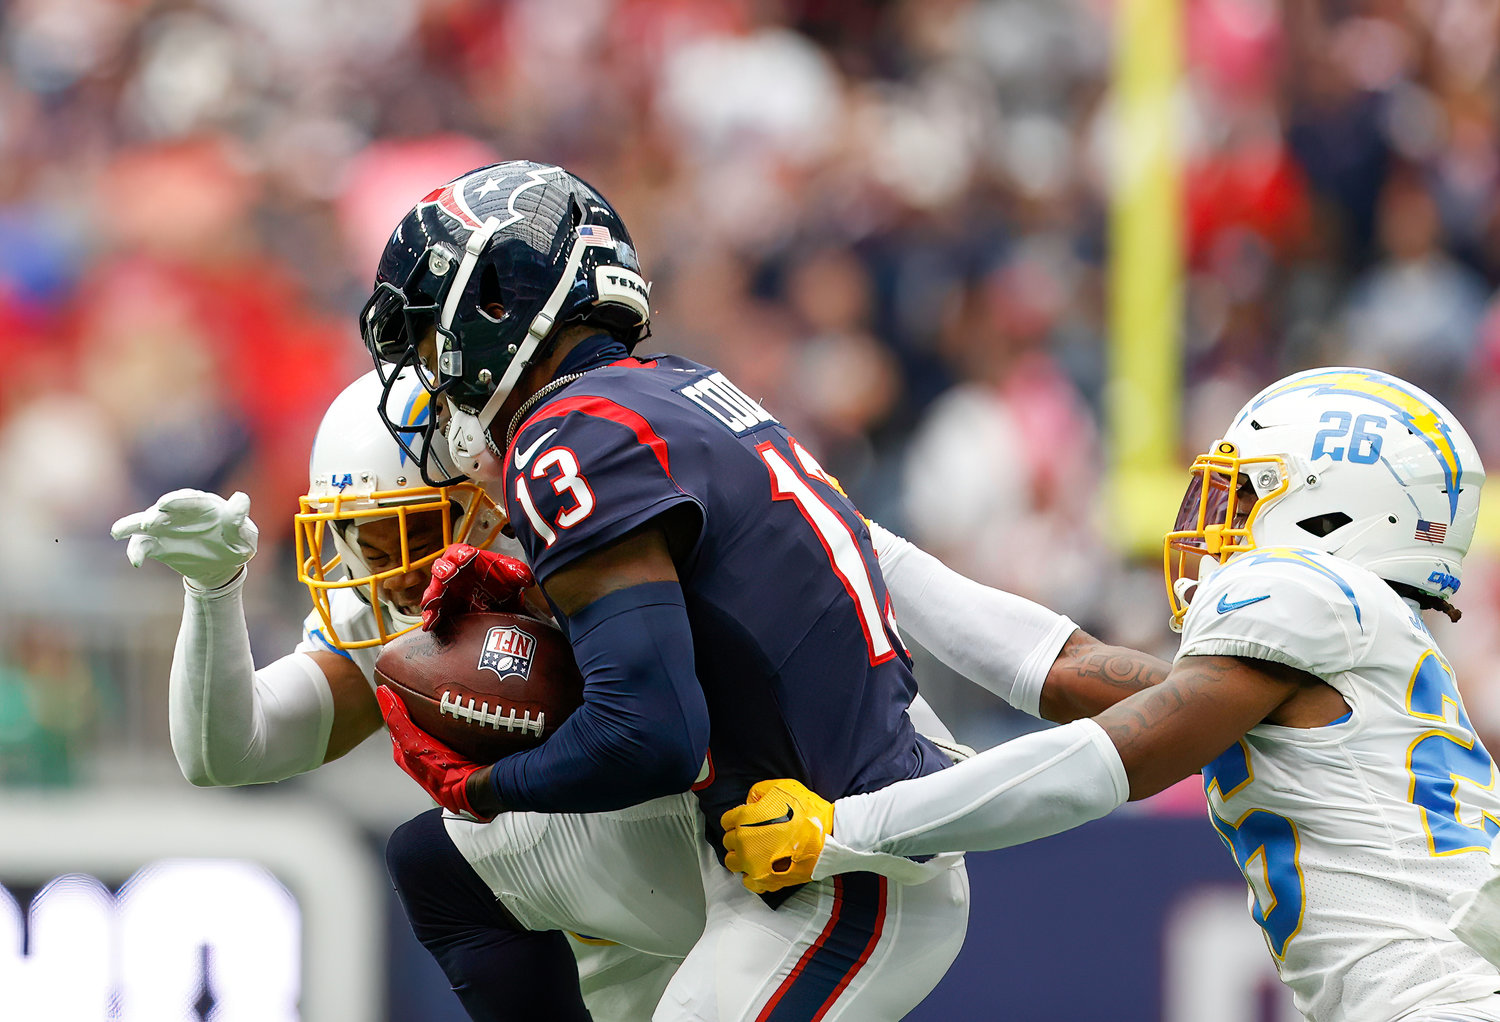 Texans wide receiver Brandin Cooks (13) makes a catch during an NFL game between the Texans and the Chargers on Oct. 2, 2022 in Houston. The Chargers won 34-24.